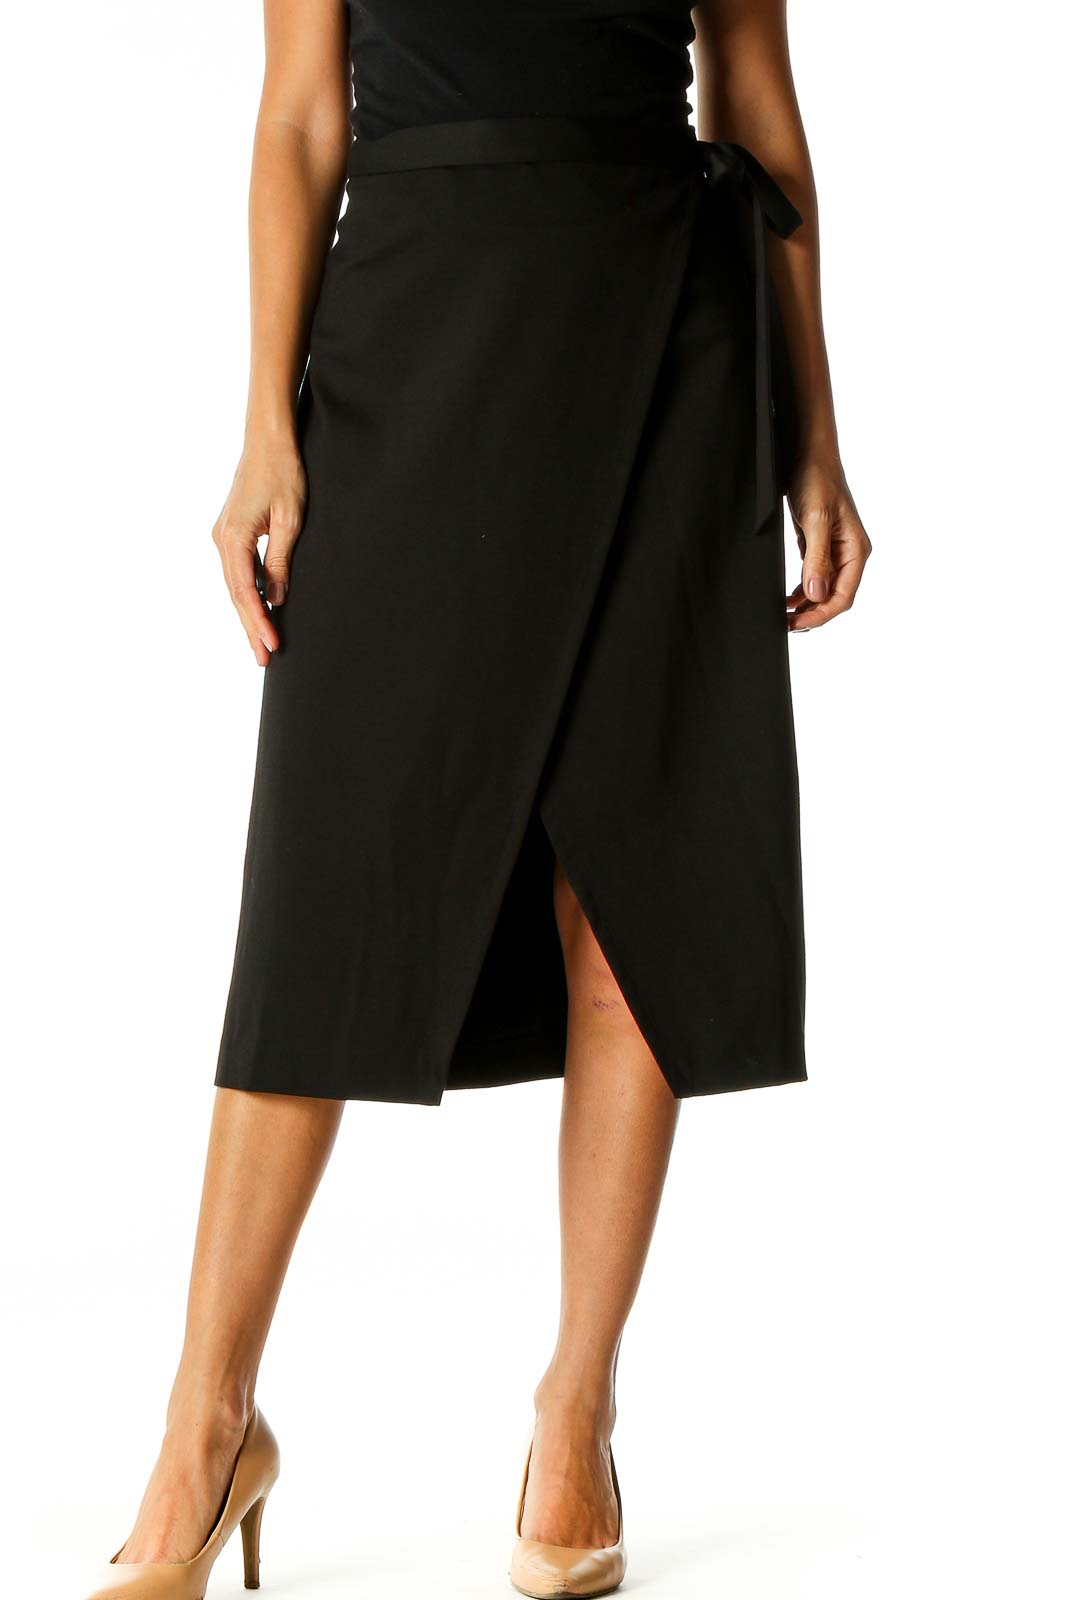 Black Solid Chic A-Line Skirt Front